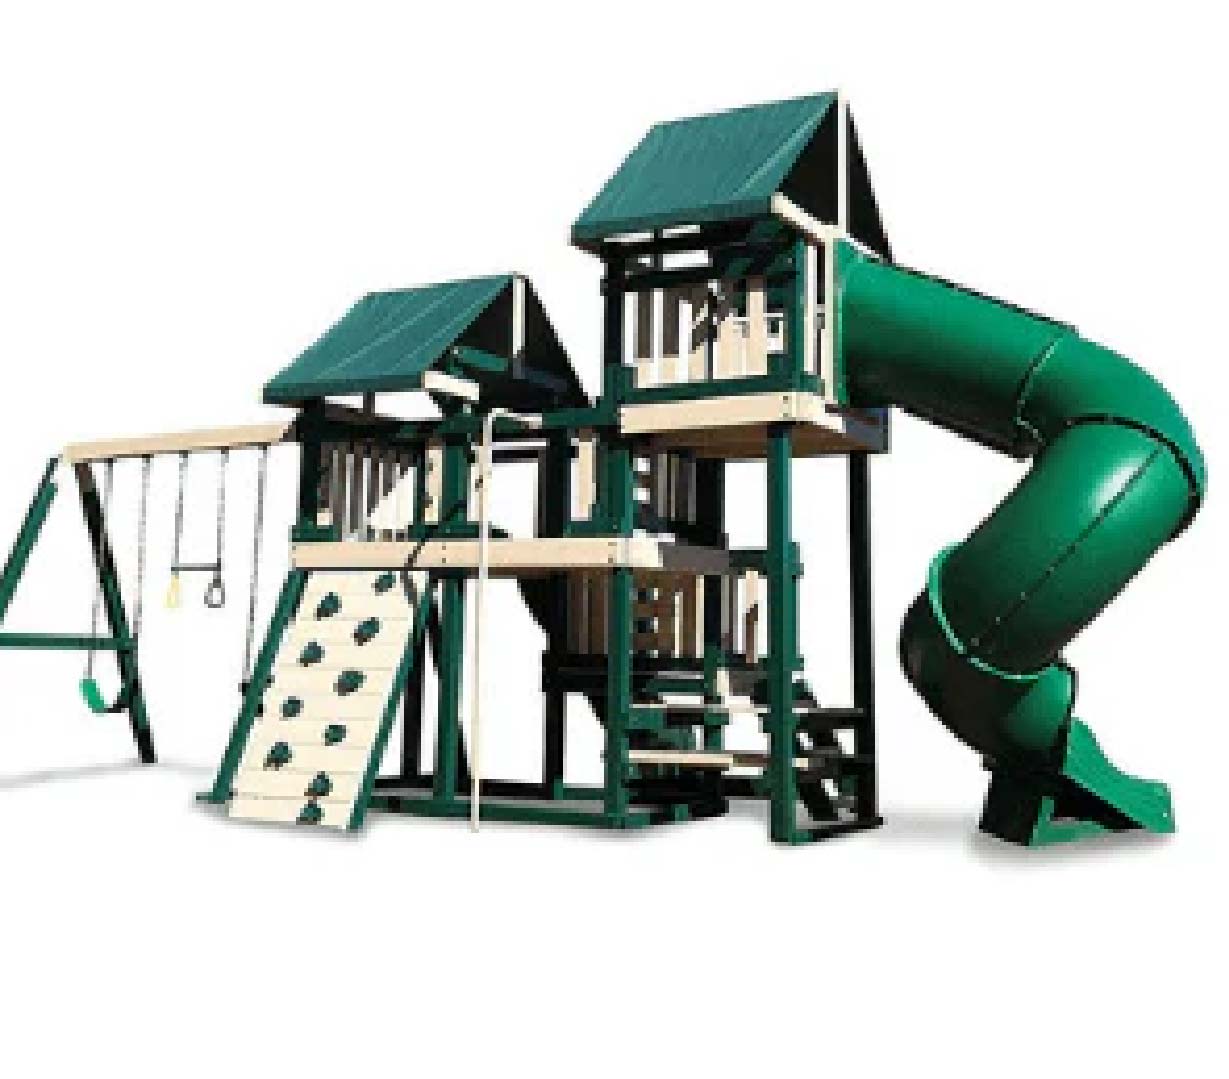 The Outdoor Play Store